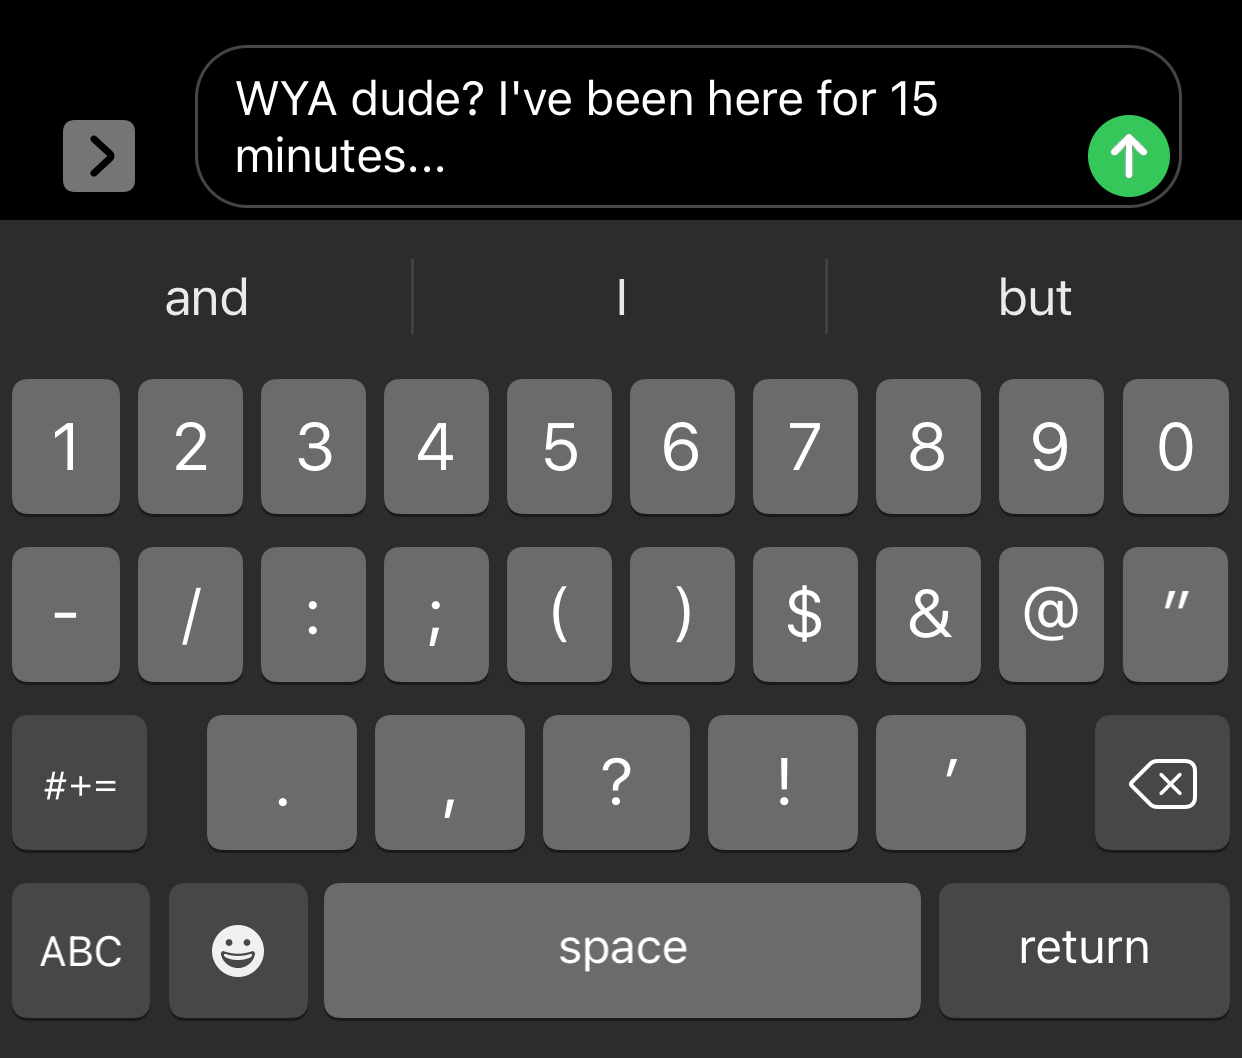 An example of the initialism WYA in a text message.